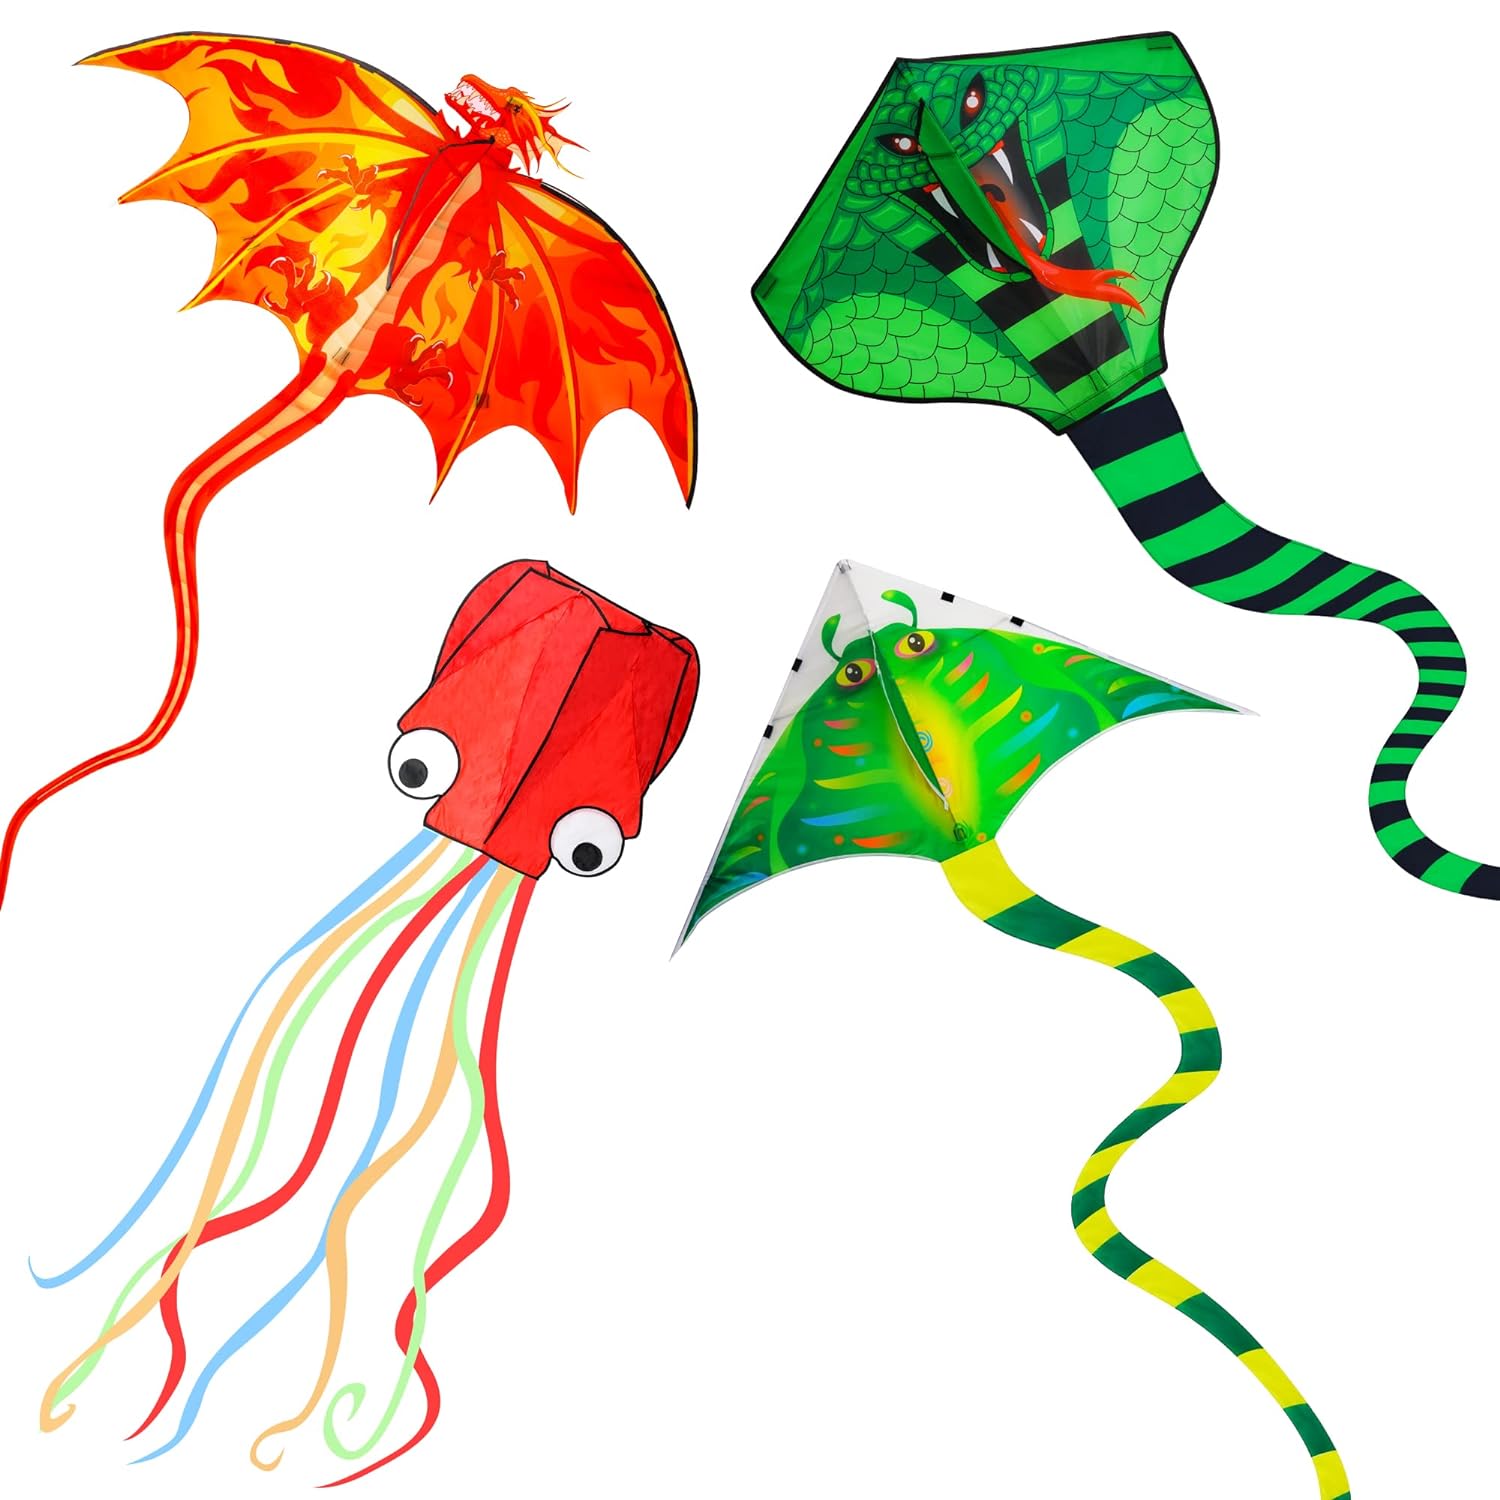 Great Choice Products 4 Pack Kites - Large Fire Dragon Kite Green Snake Kite Devil Fish Kite Red Mollusc Octopus With Long Colorful Tail For K…